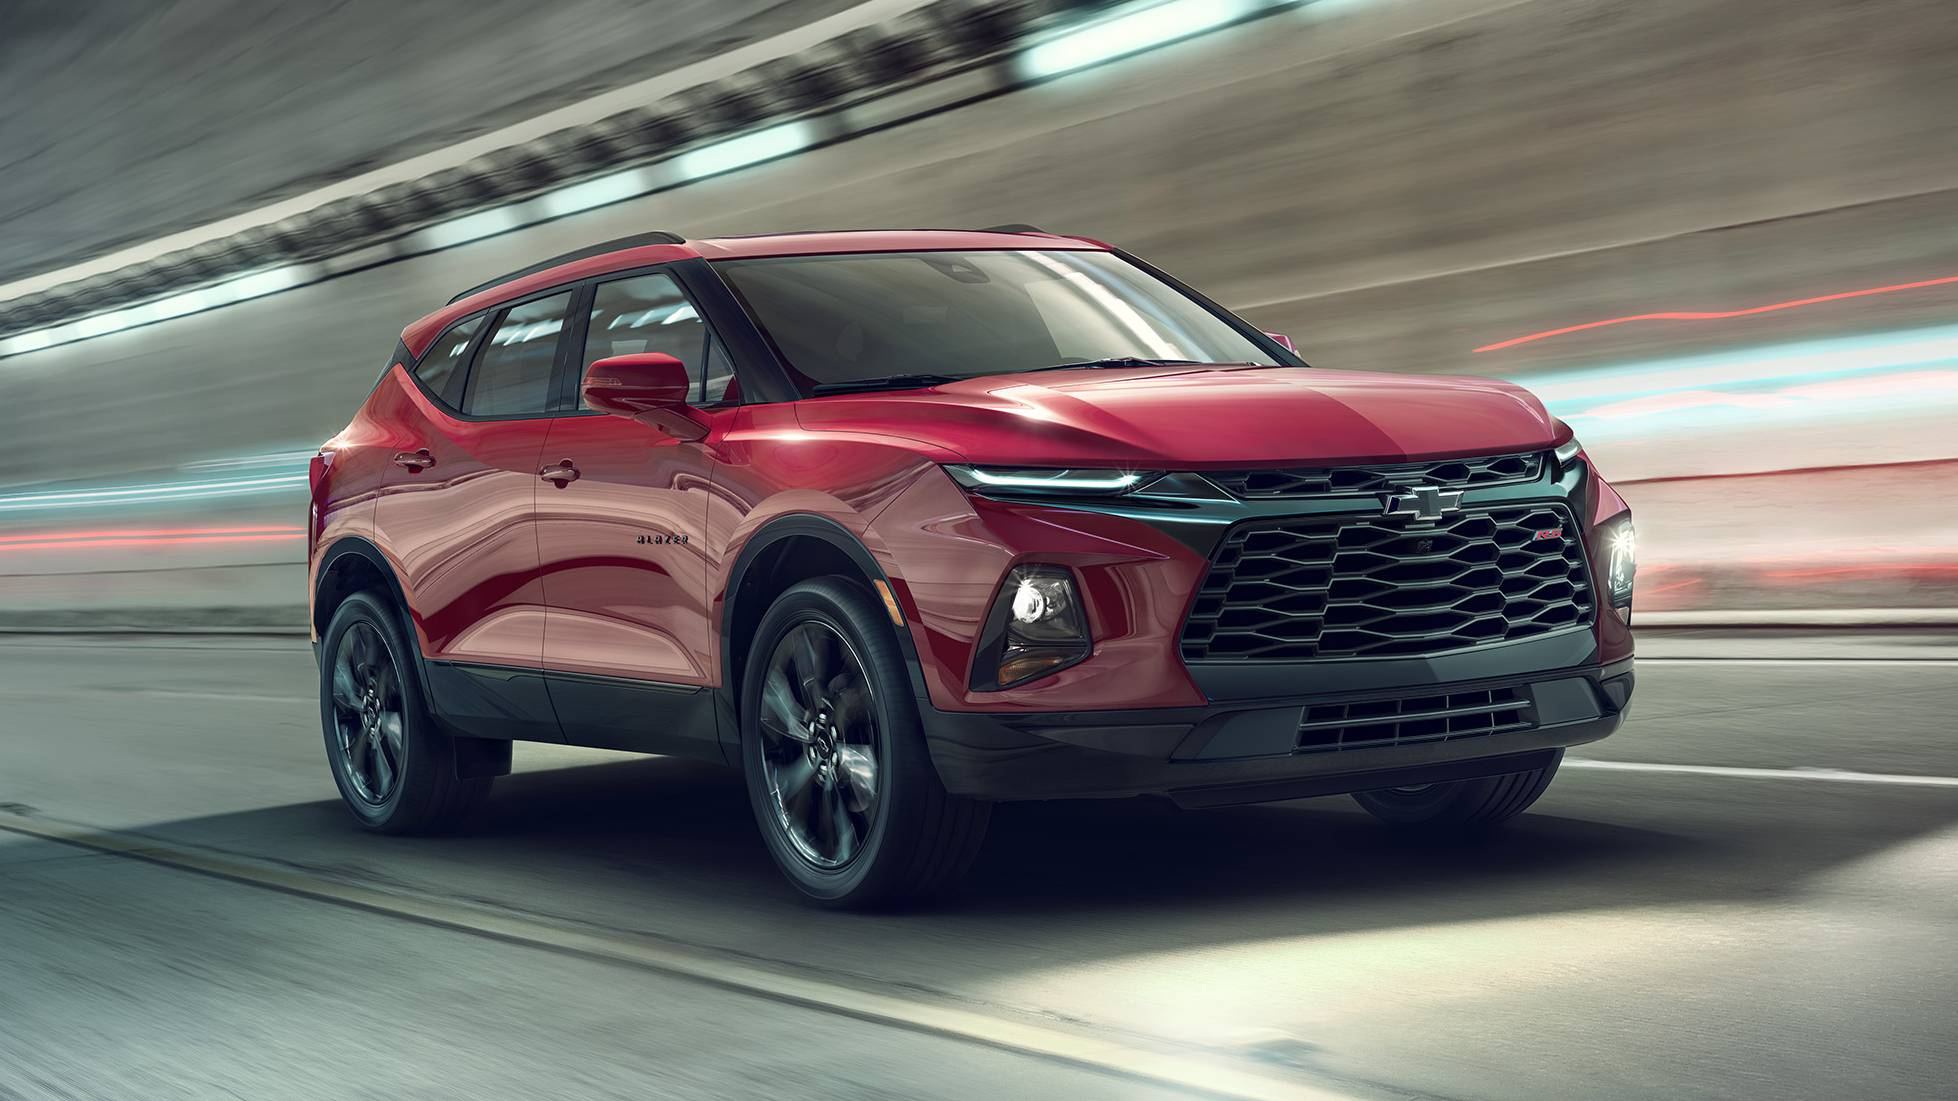 News Chevrolet Reveals New Blazer Crossover Out In 2019